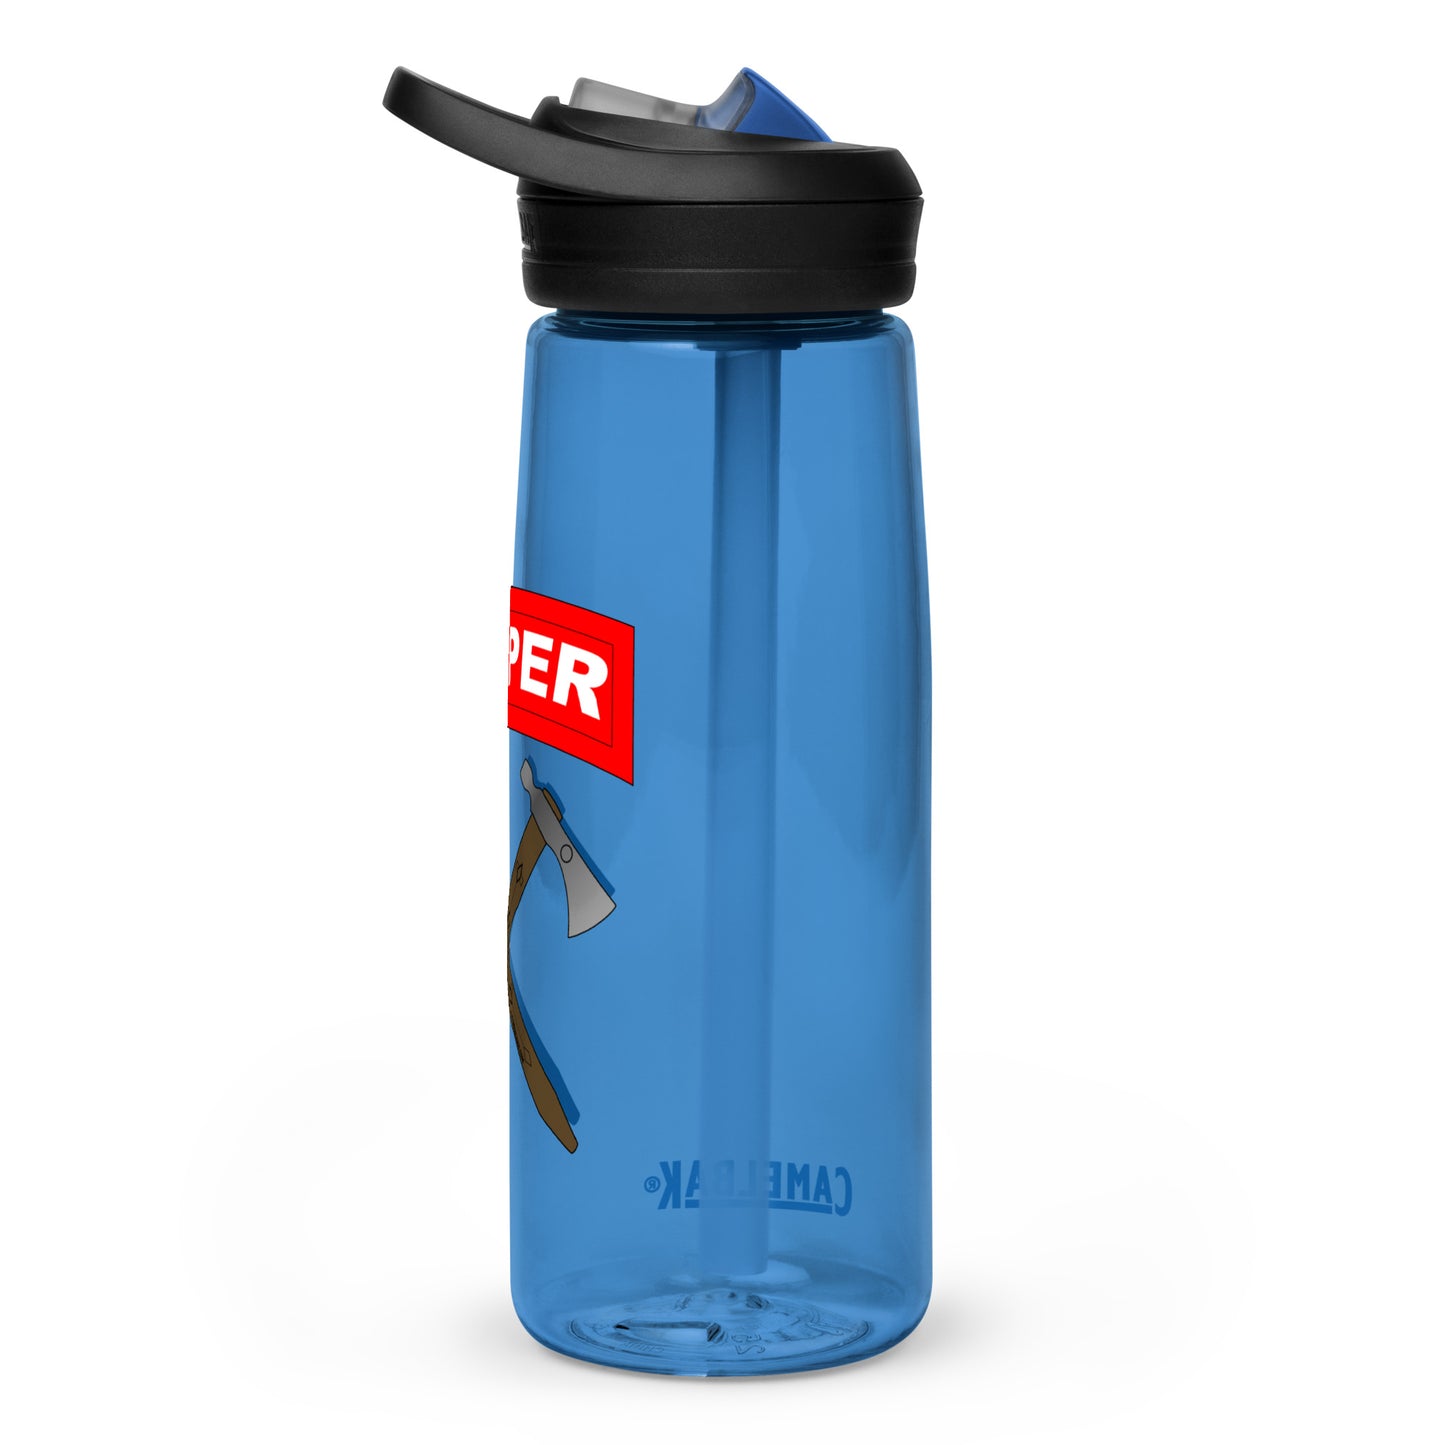 Sapper Tab and Pipehawks water bottle